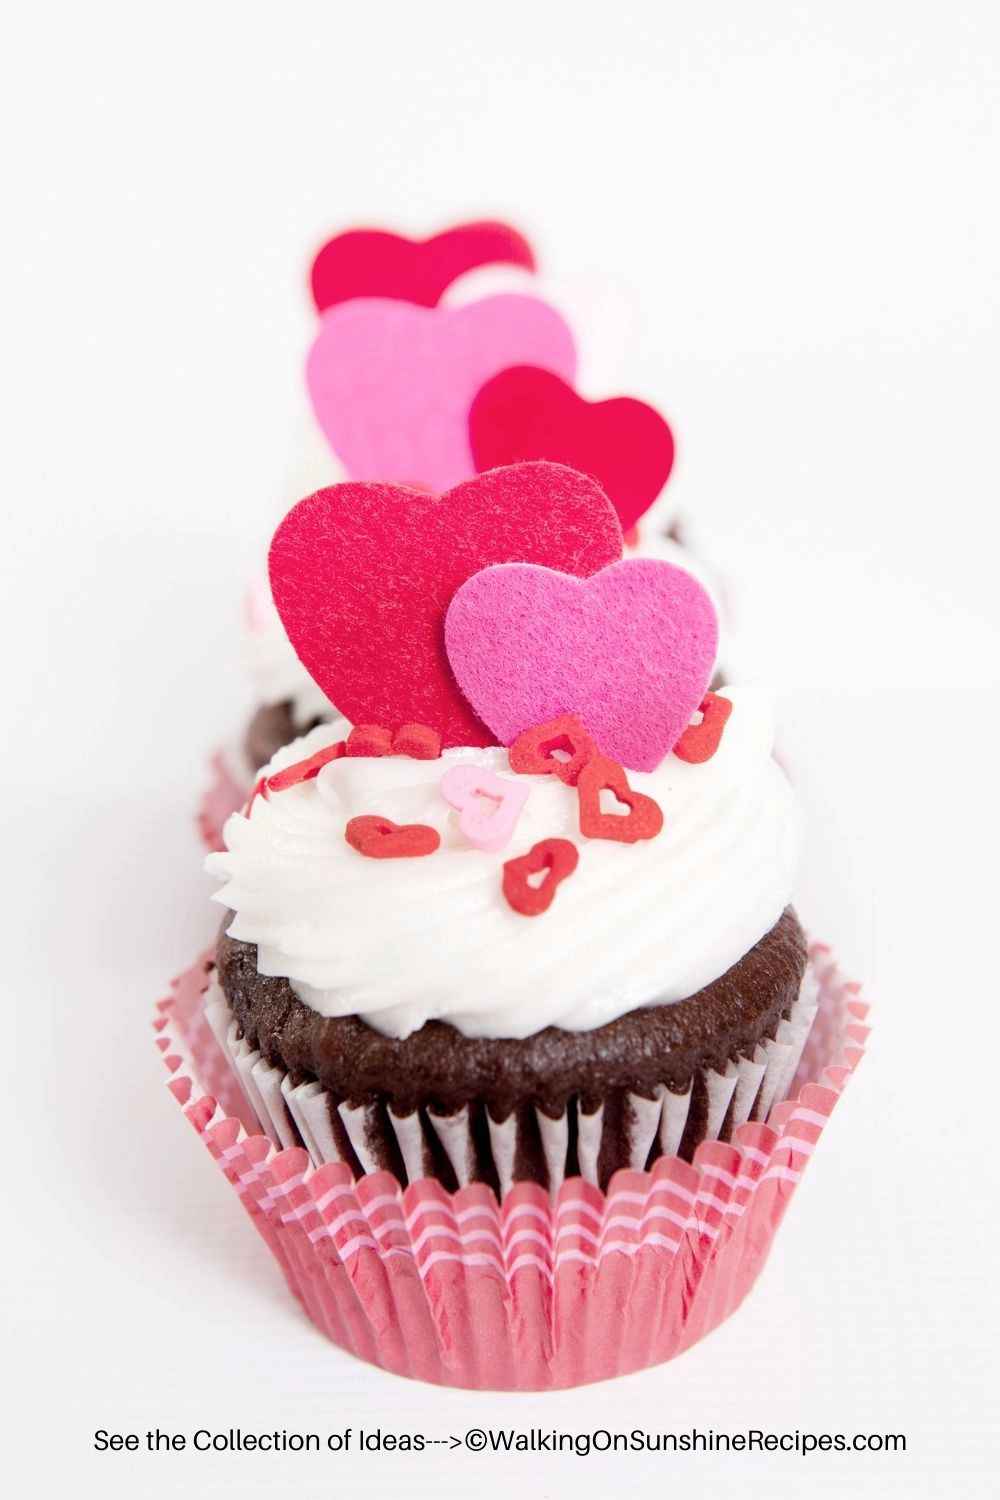 Chocolate cupcake with heart shaped toppings. 